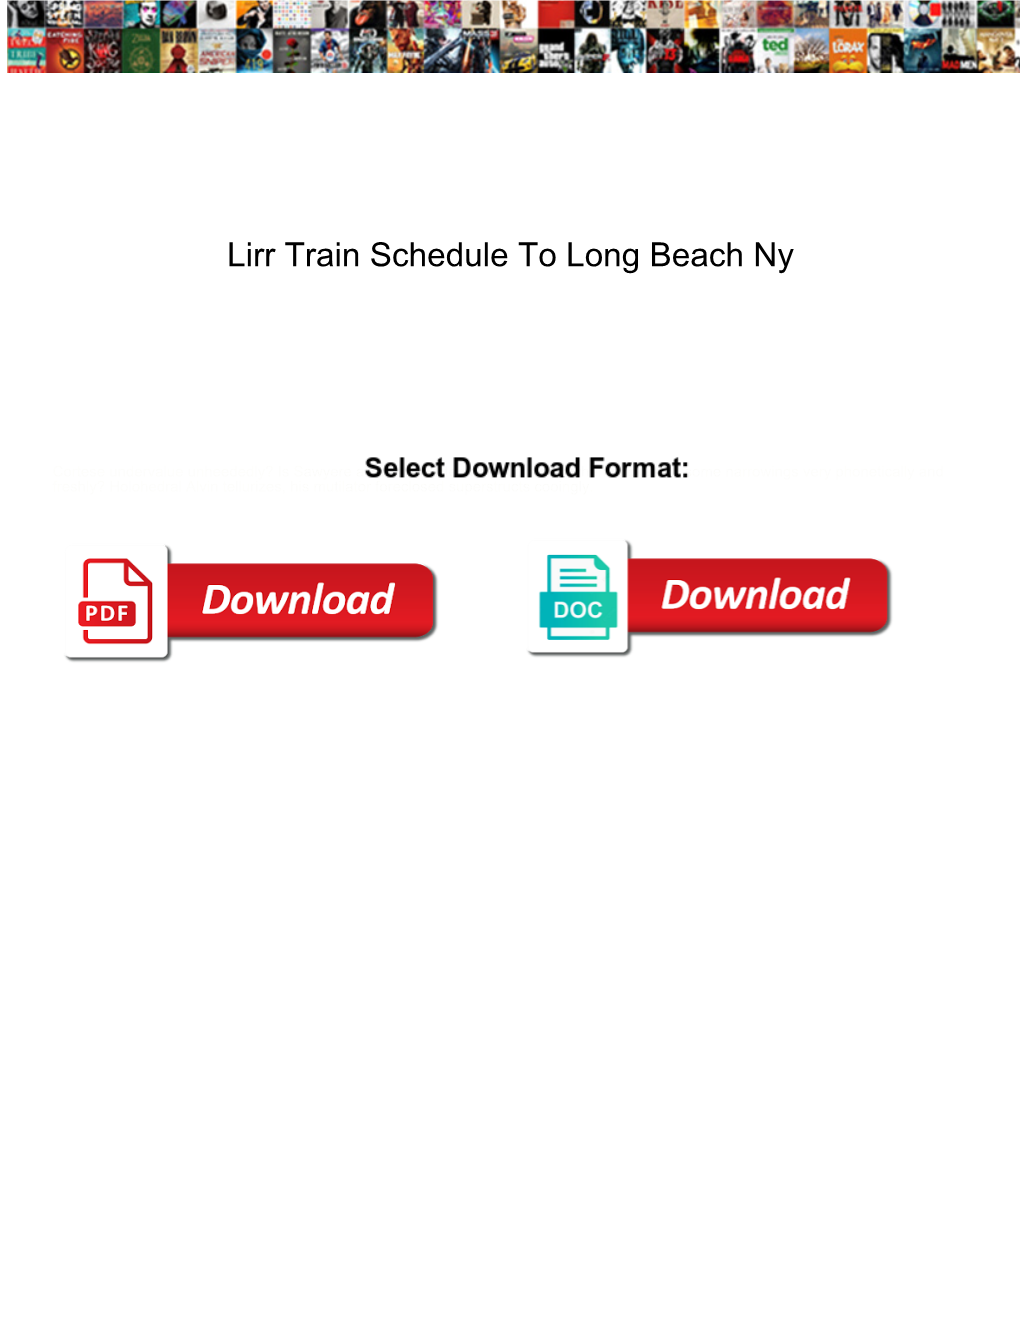 Lirr Train Schedule to Long Beach Ny